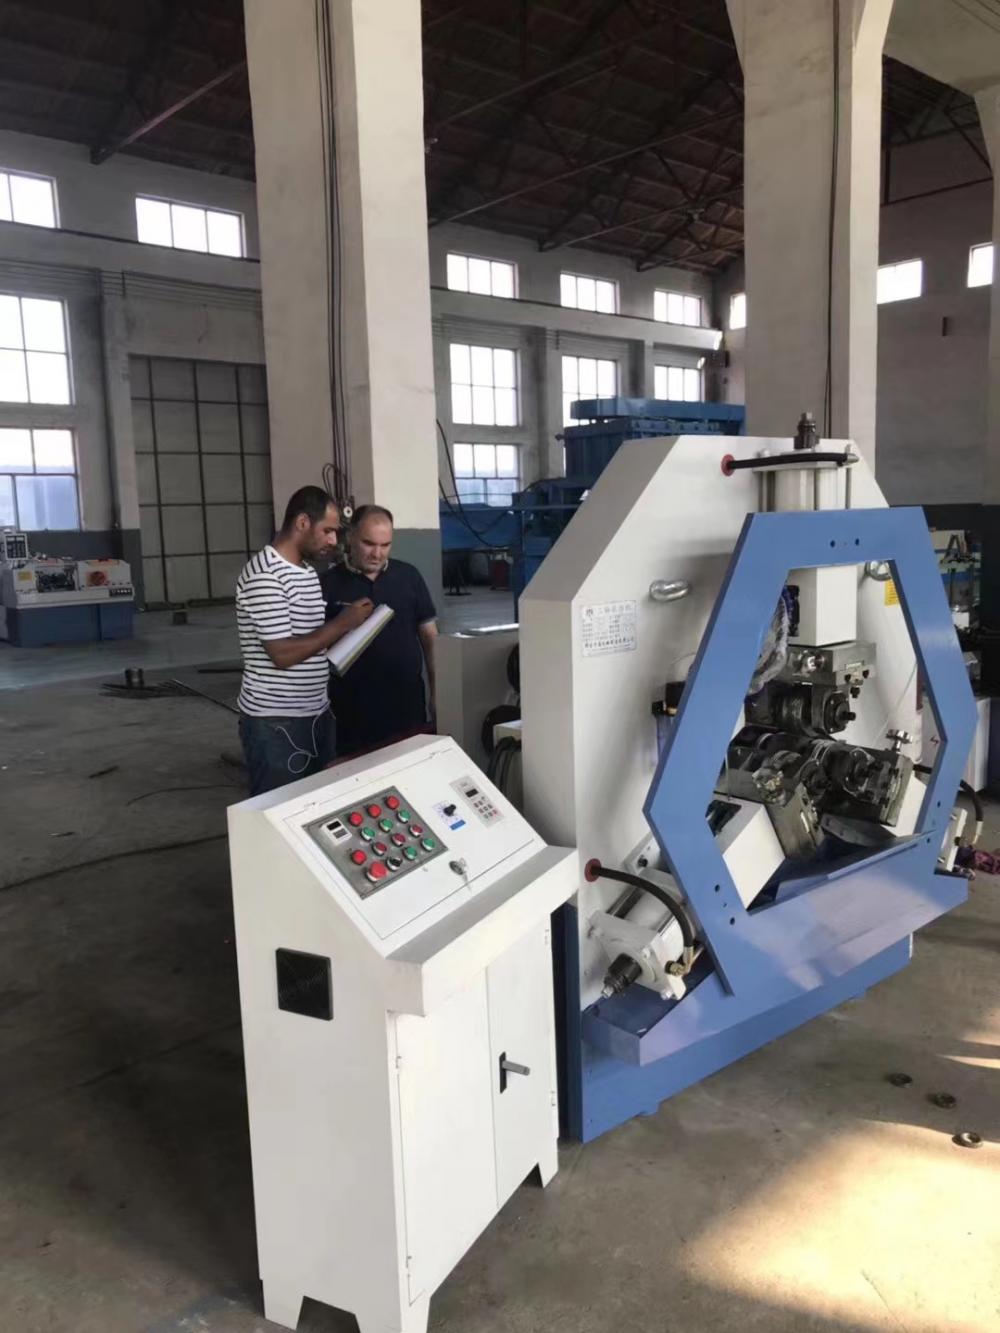 Automatic pipe thread rolling machine